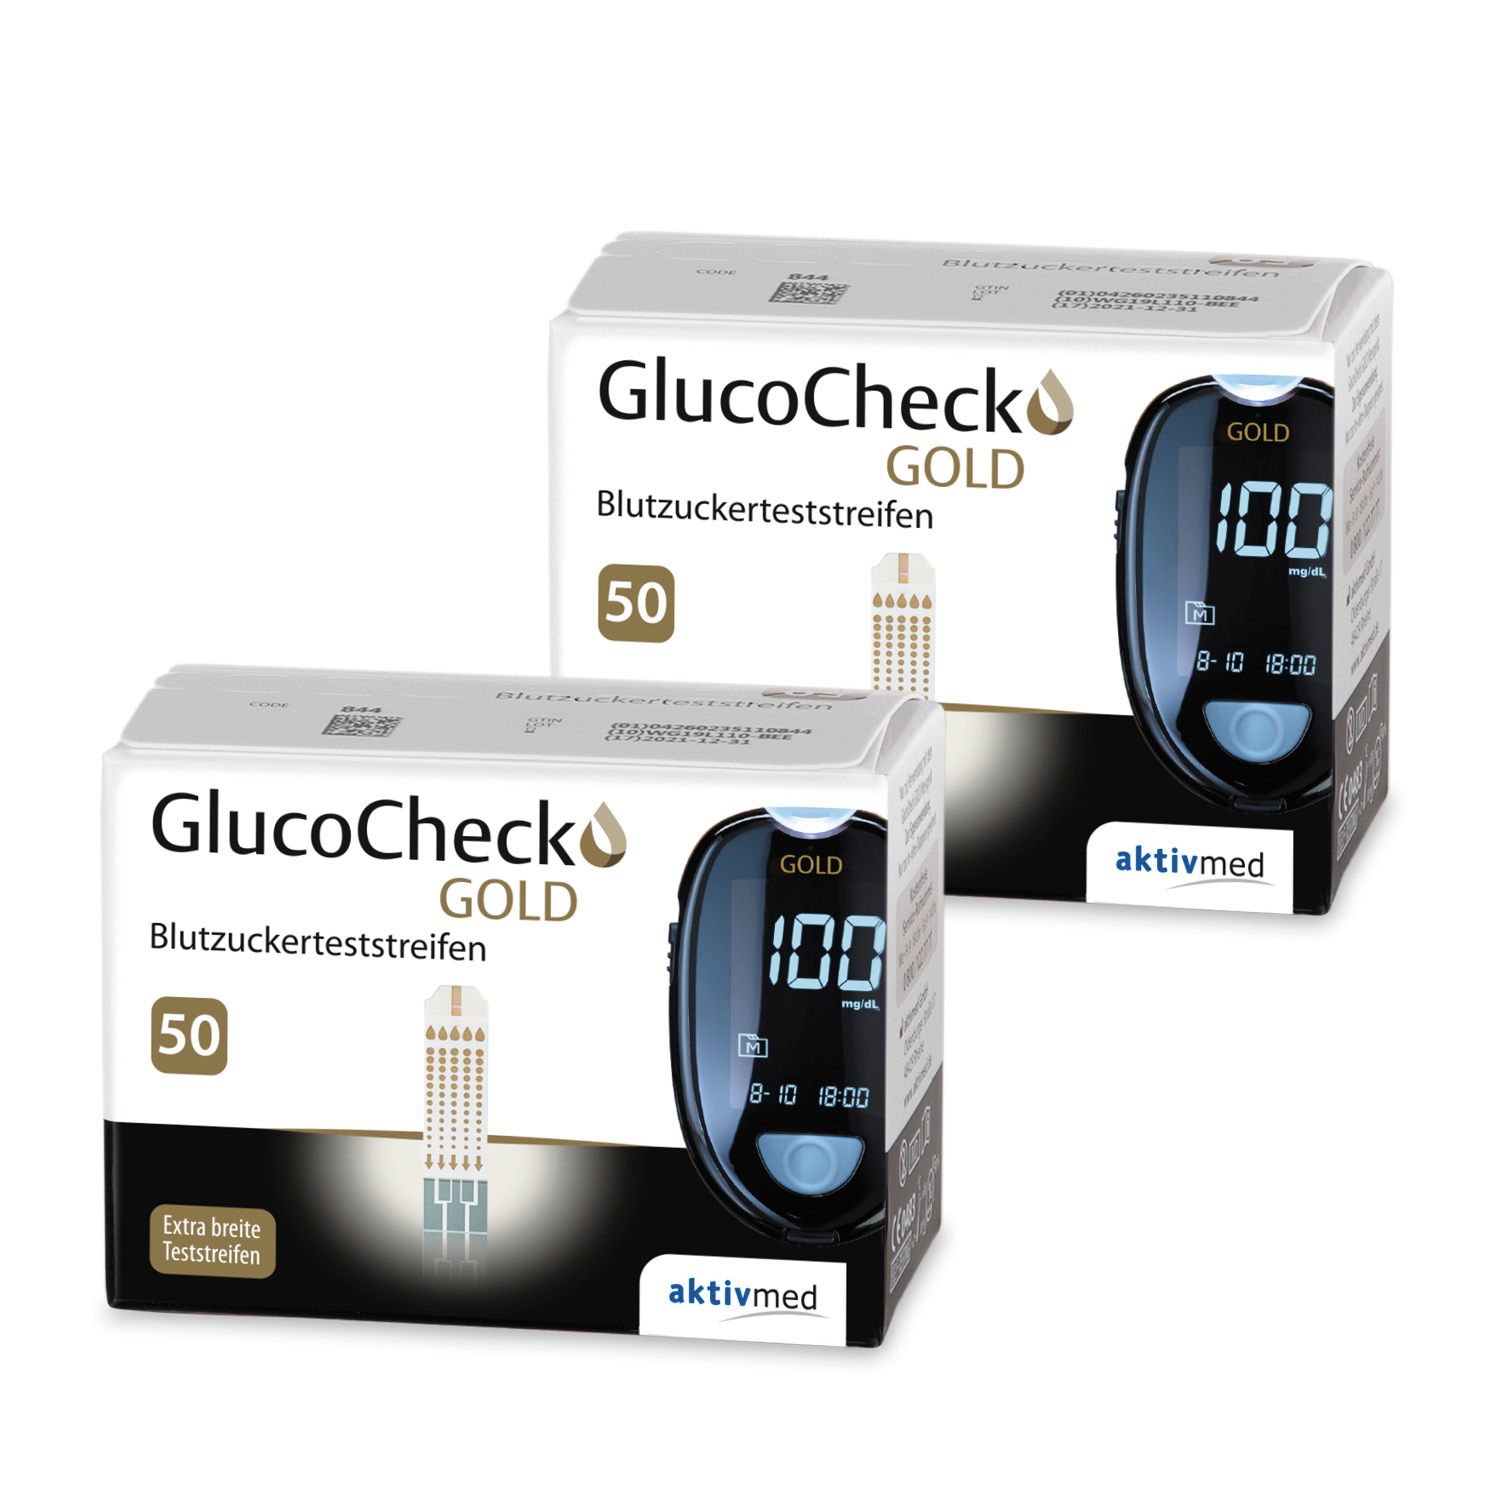 Glucocheck gold test strip (100 pieces) for blood sugar control in diabetes